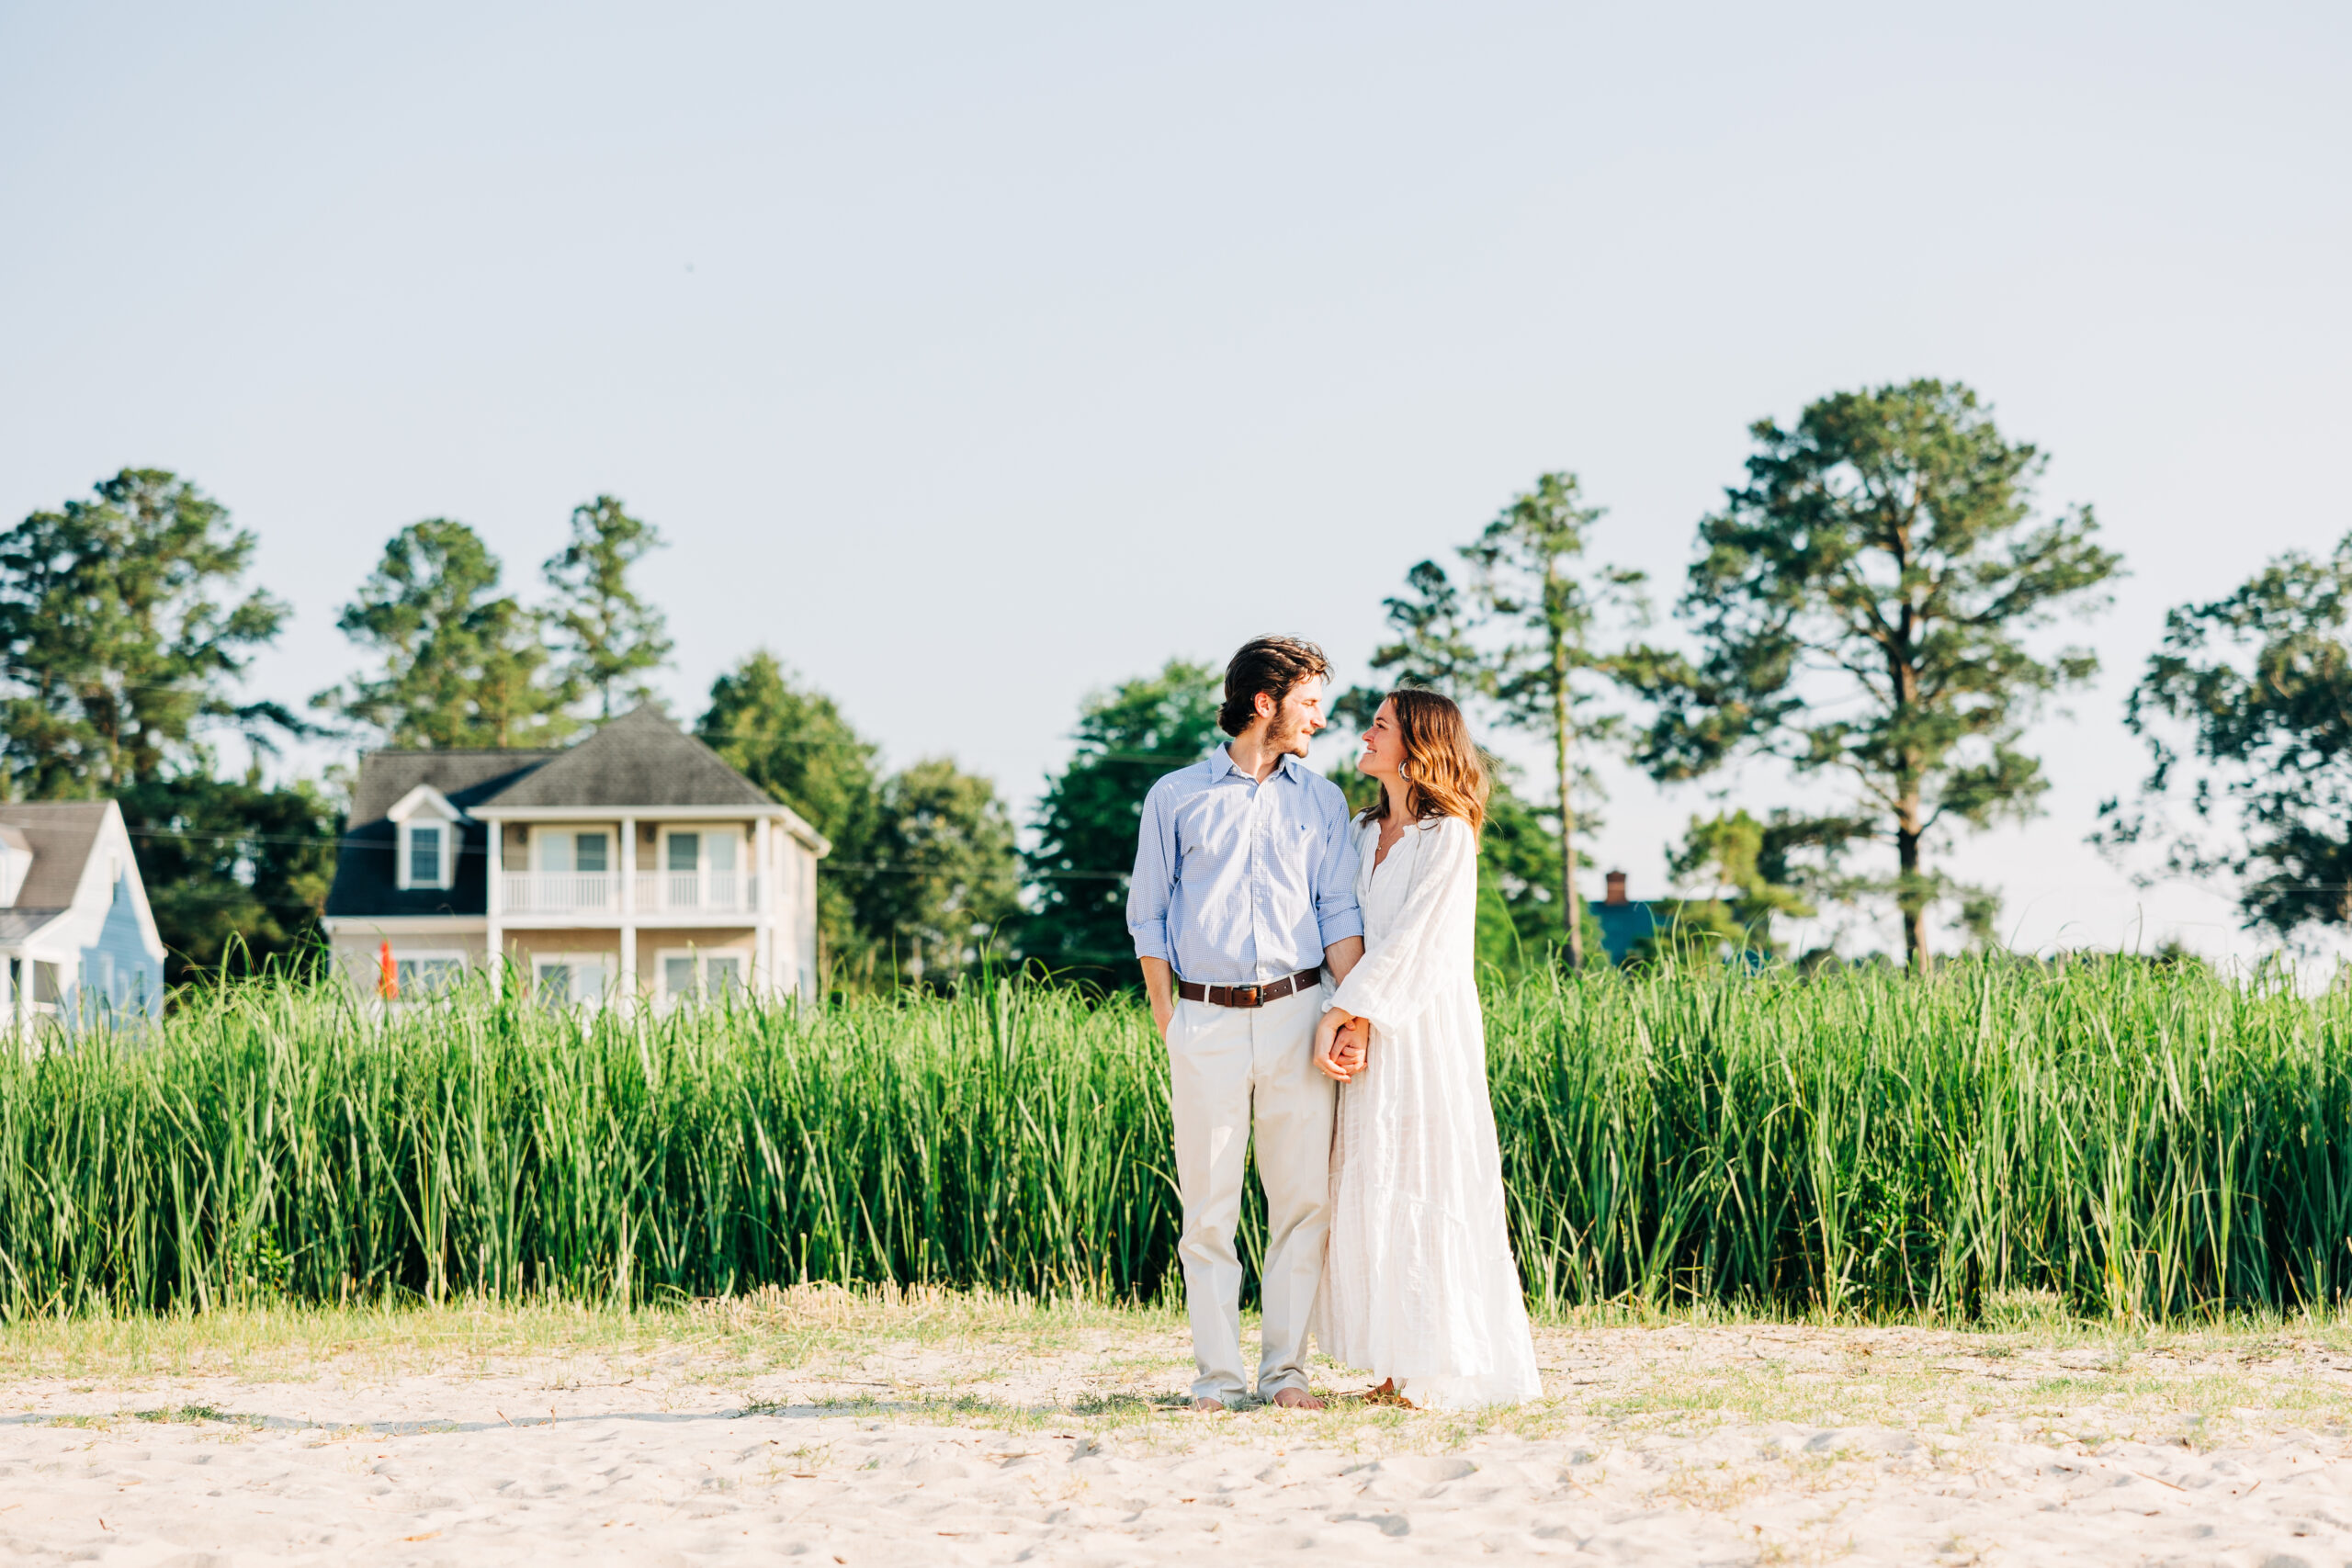 Beautiful and Timeless Love Story at Rappahannock River